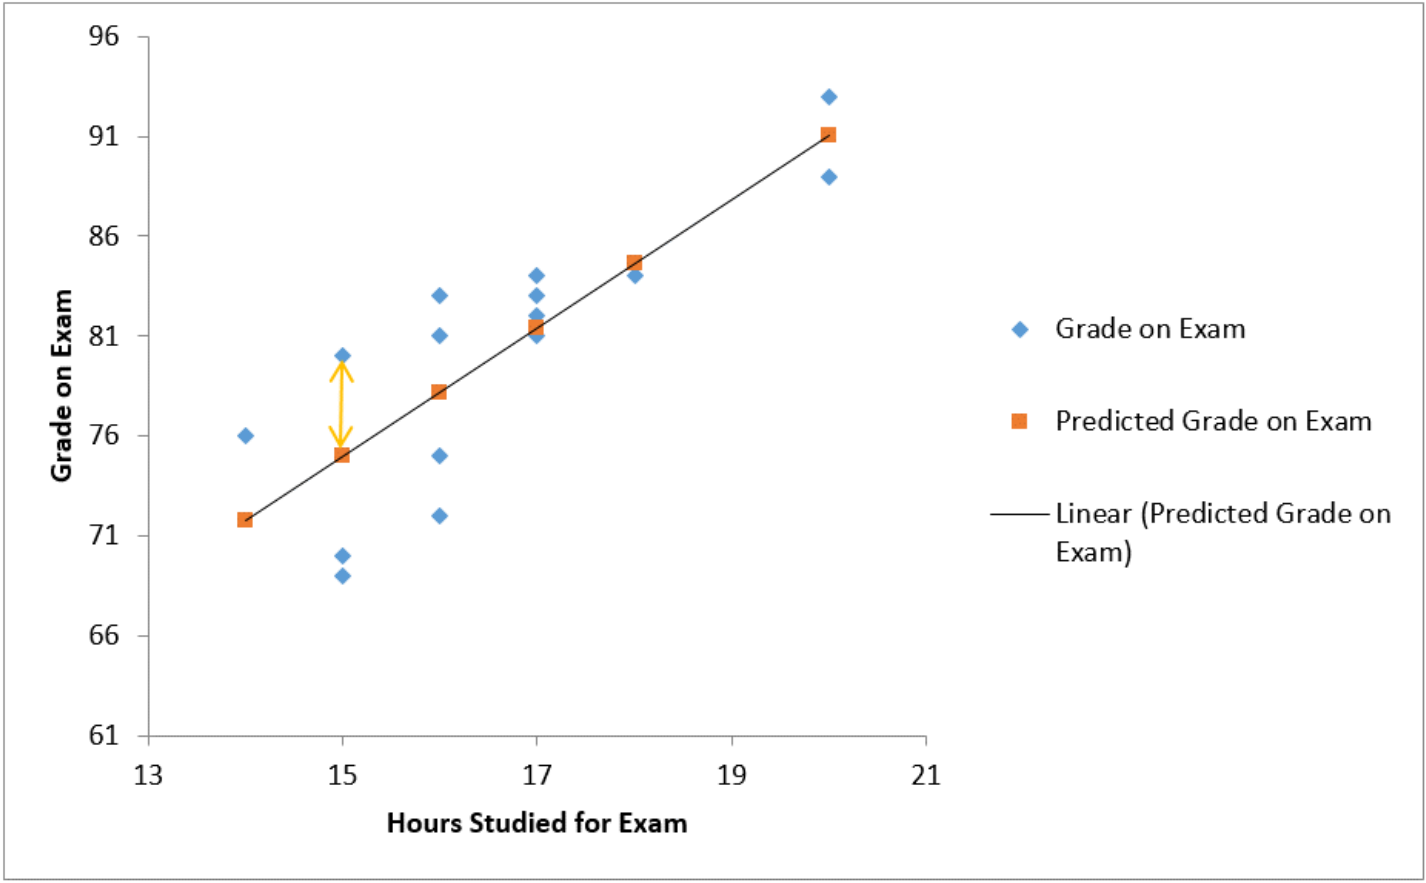 Scatterplot of grade vs hours studied data, with the regression line of predicted grade and one point marked on the regression line for each x-value present displayed. A double-headed yellow arrow shows the vertical distance between the predicted grade for x=15 and the actual data point of (15, 80).